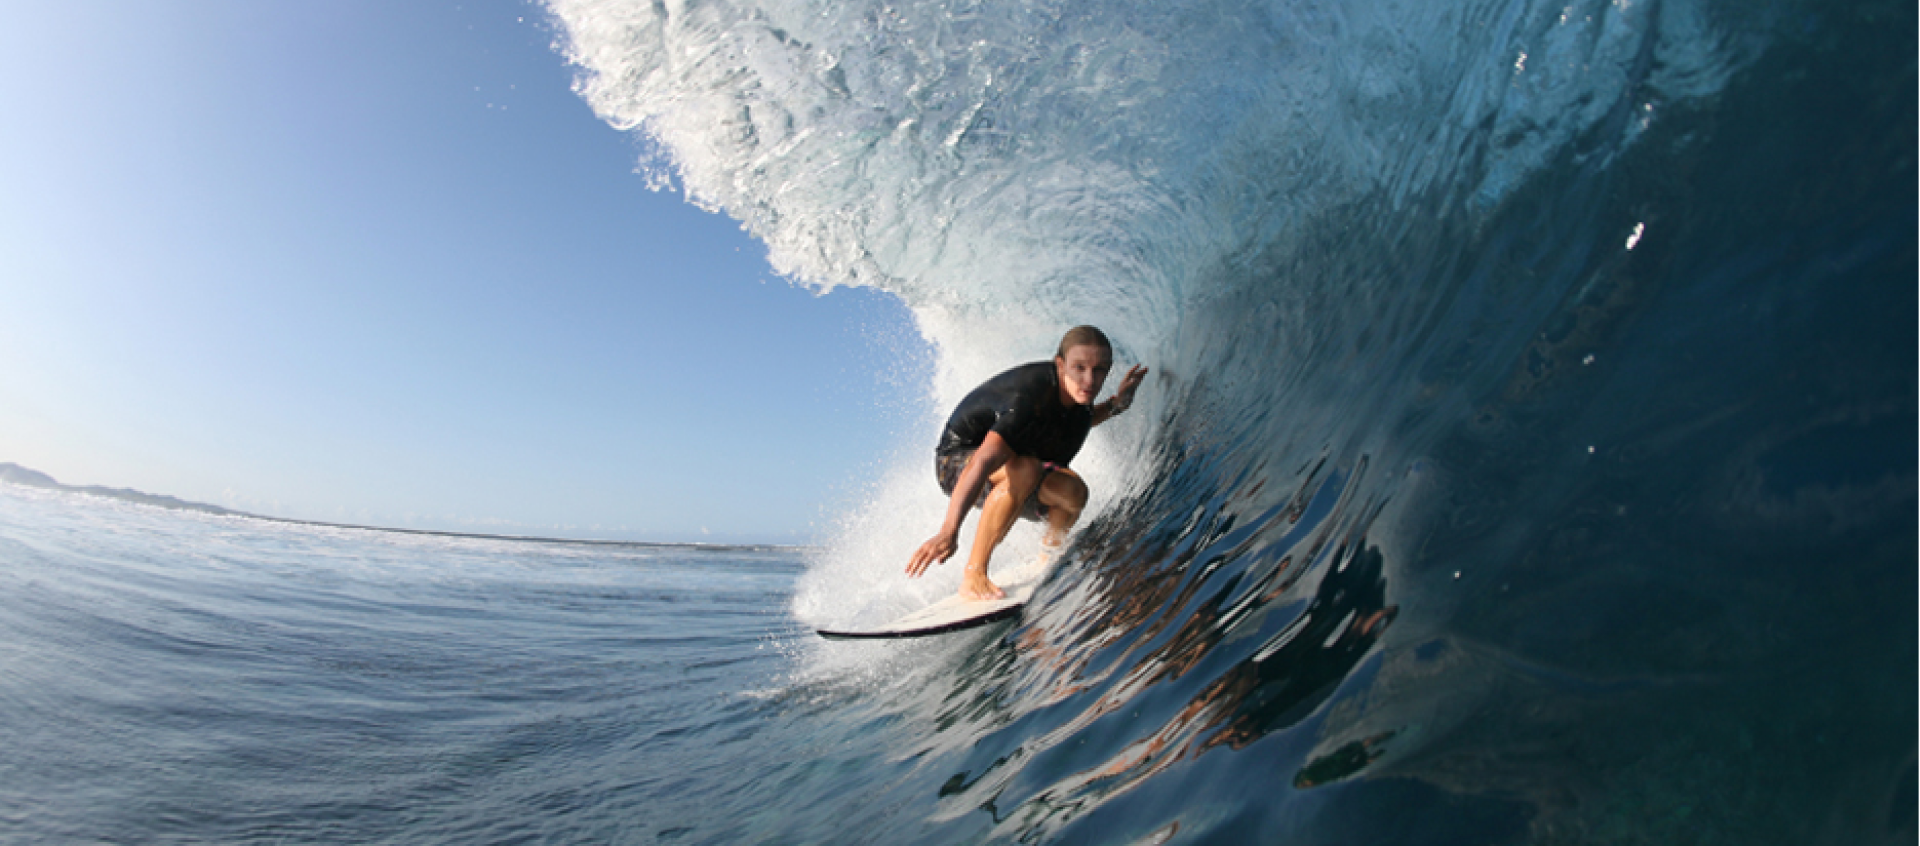 A man is riding a wave on a surfboard in the ocean.